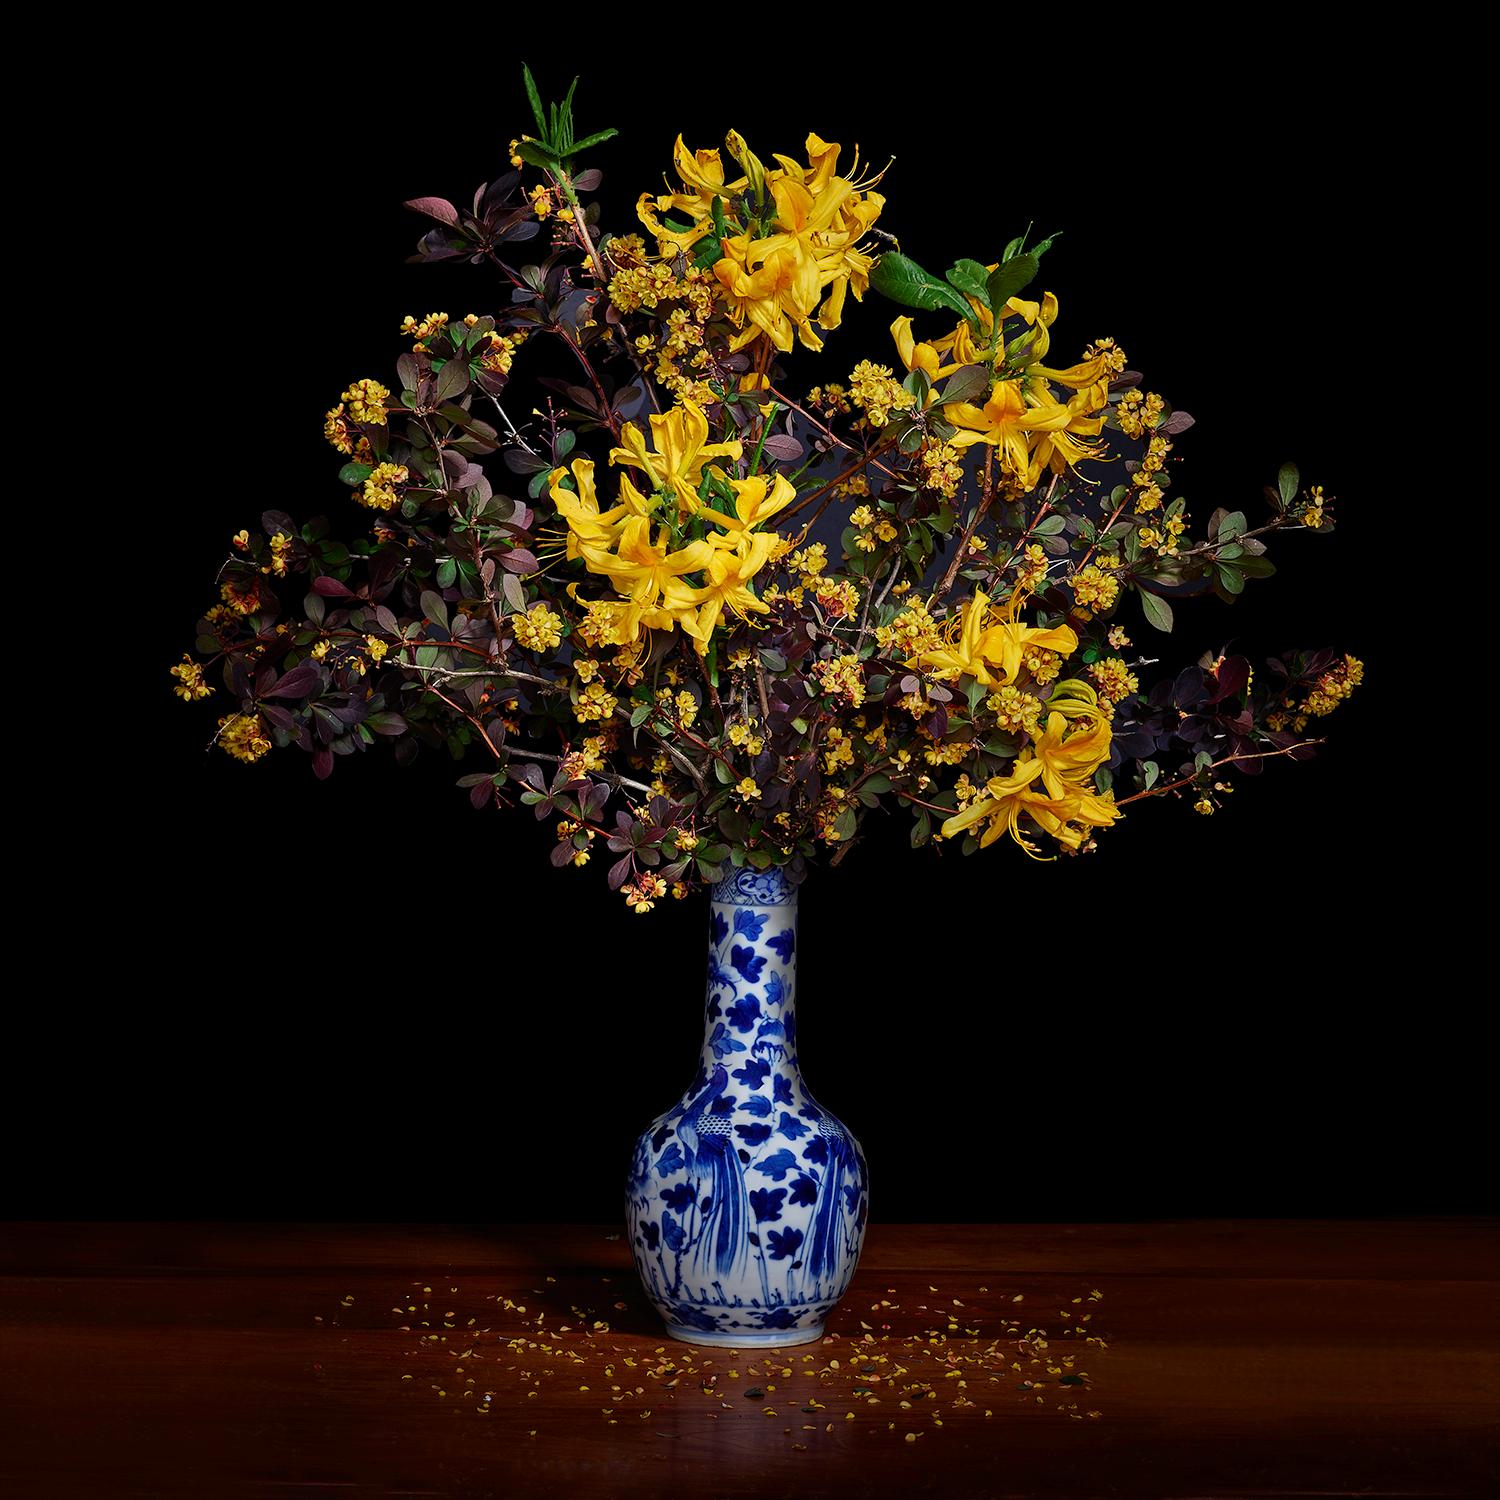 T.M. Glass Color Photograph - Yellow Azalea and Barberry in a Blue and White Chinese Vase